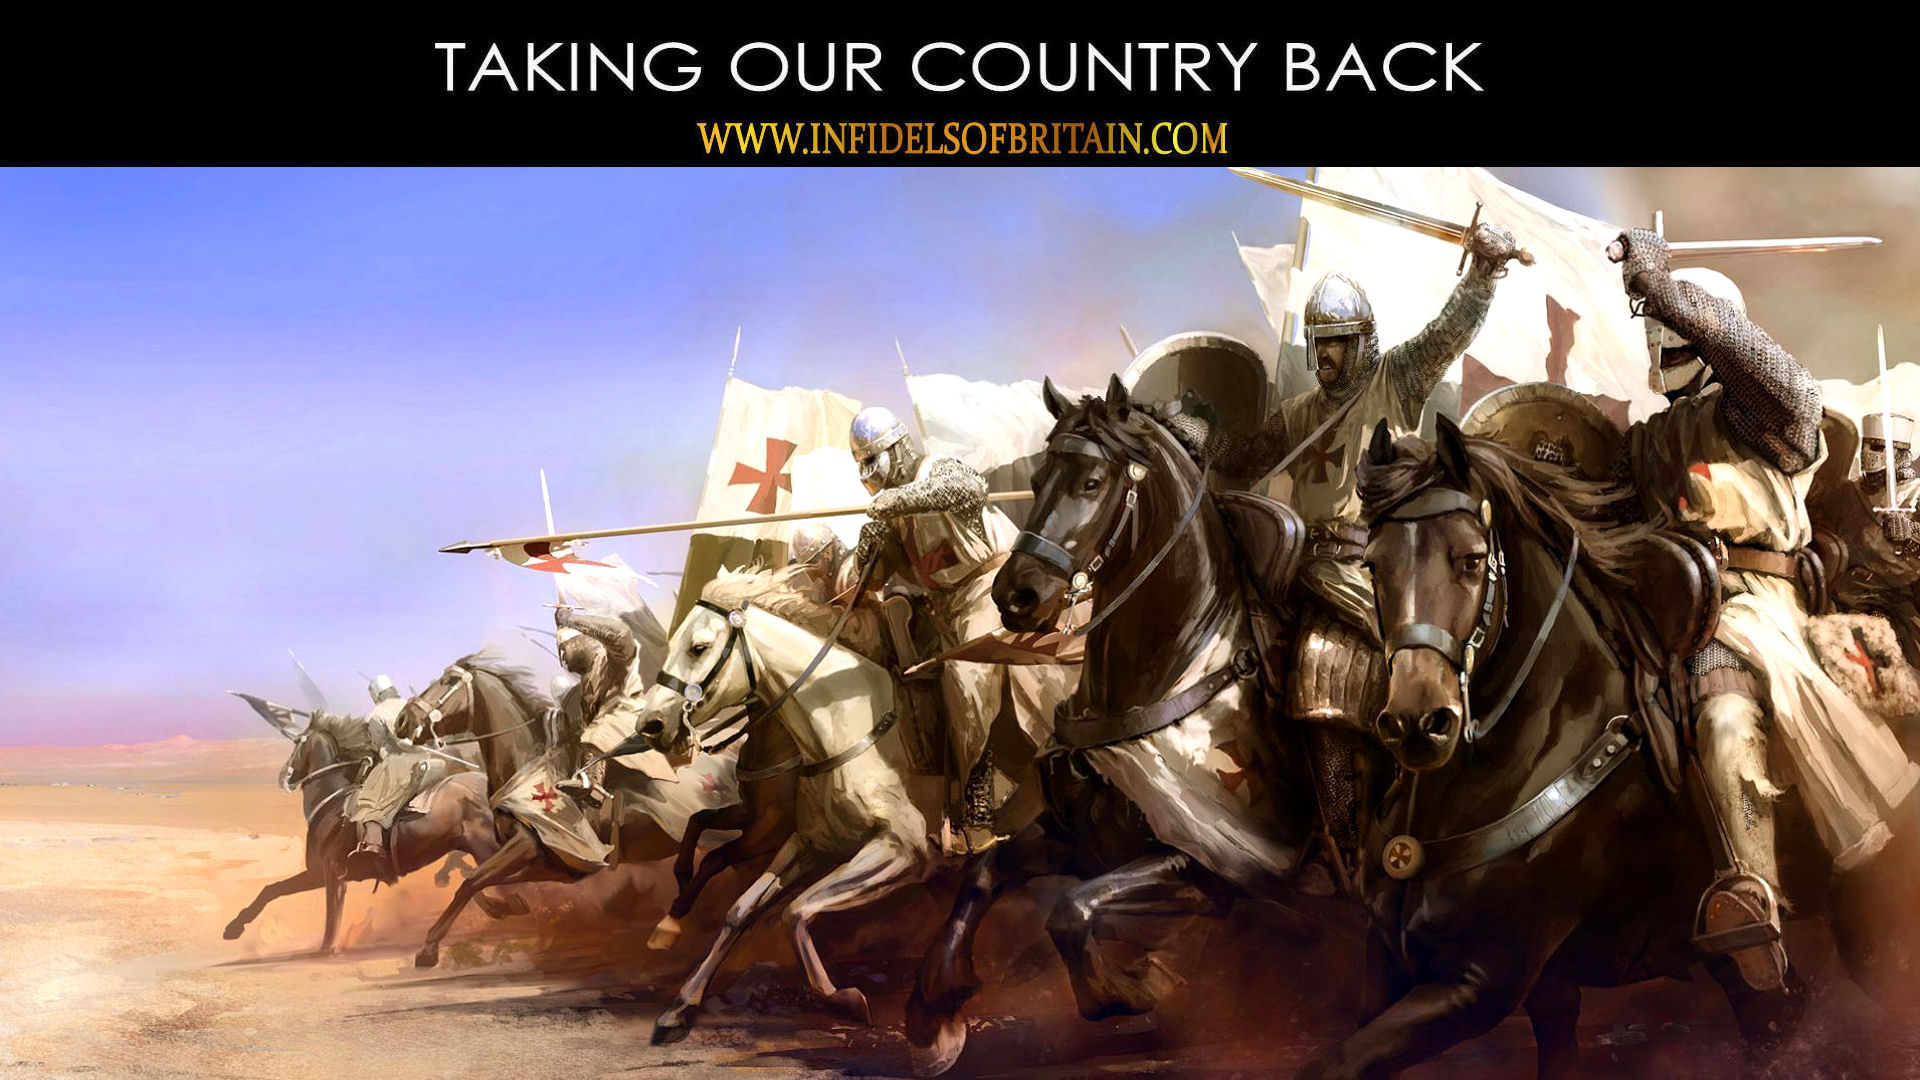 INFIDELS OF BRITAIN - TAKING OUR COUNTRY BACK